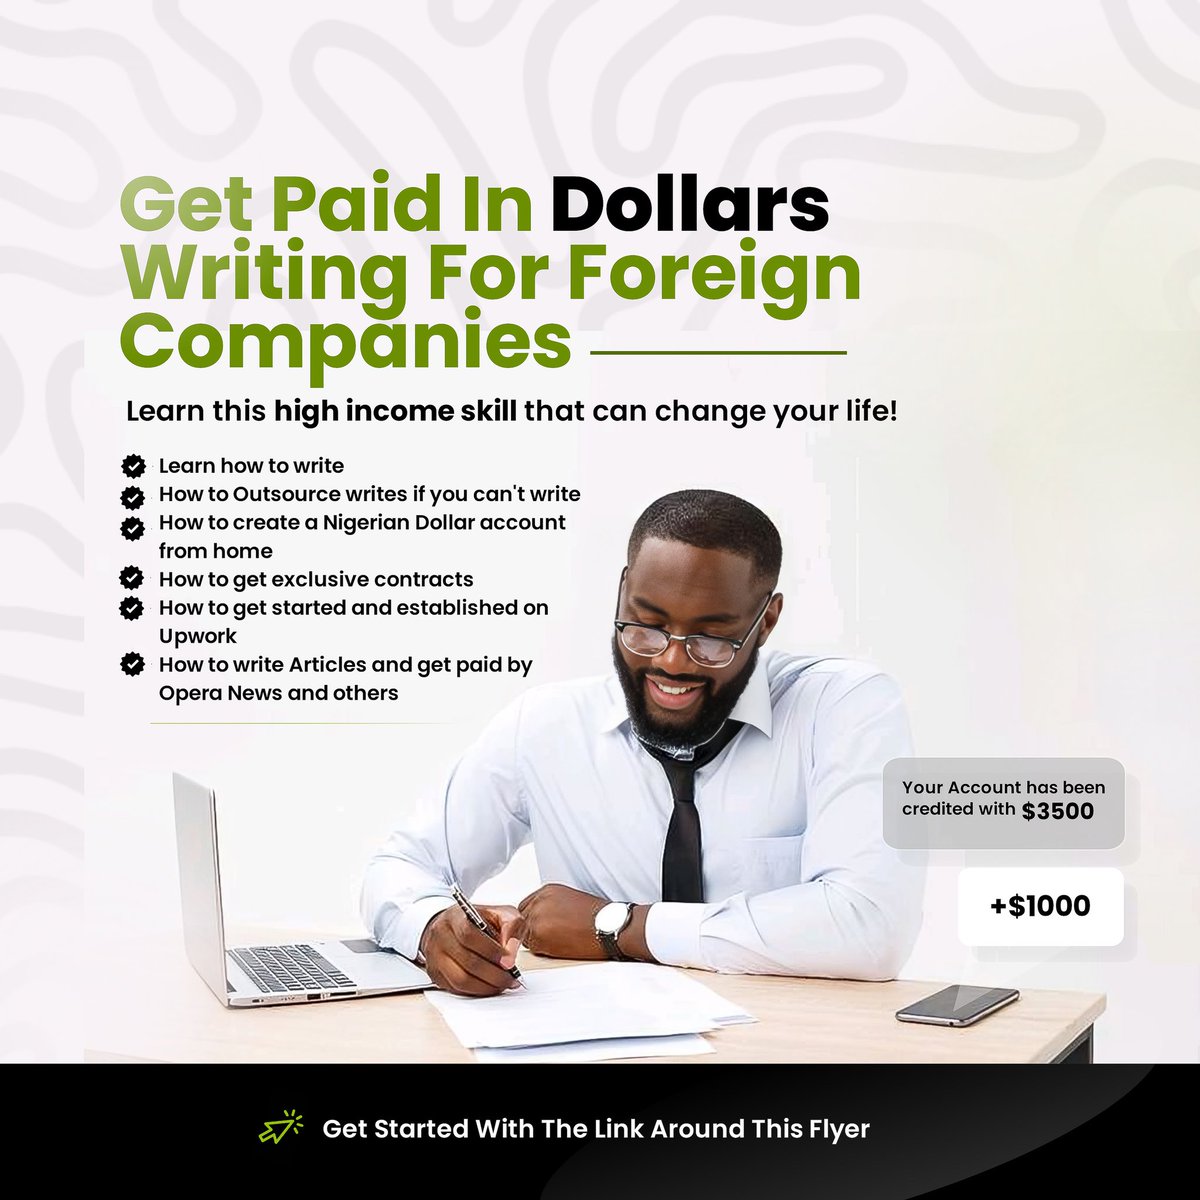 Ready to turn your writing skills into a profitable business? Our Ghostwriting Income Generator Course is the perfect place to start! #Ghostwriting #FreelanceWriting #OnlineCourses